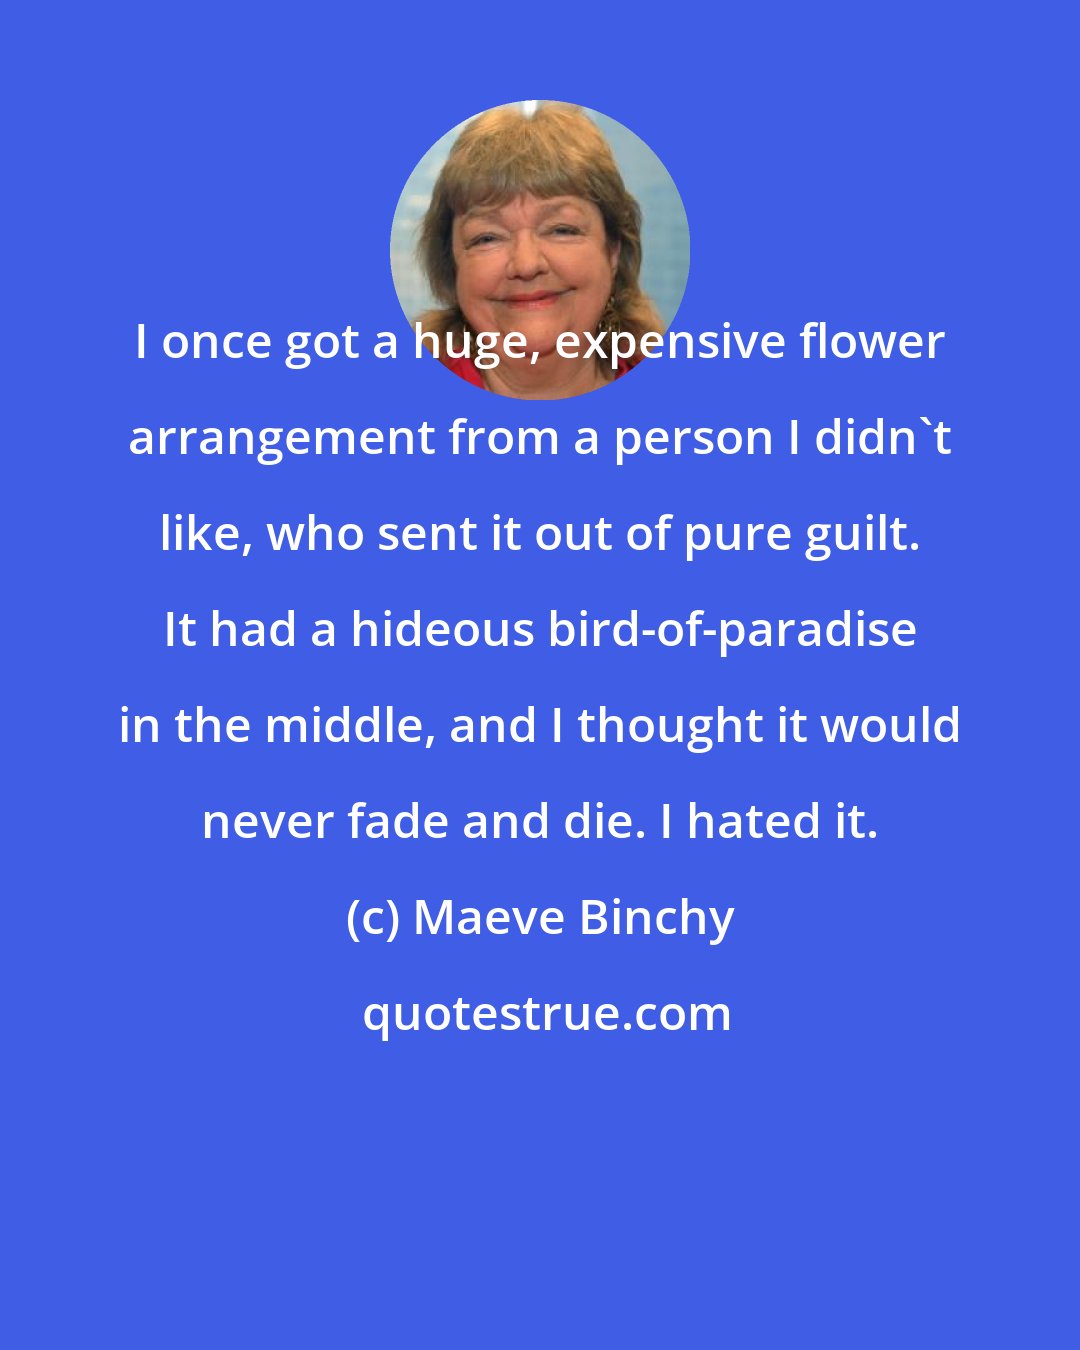 Maeve Binchy: I once got a huge, expensive flower arrangement from a person I didn't like, who sent it out of pure guilt. It had a hideous bird-of-paradise in the middle, and I thought it would never fade and die. I hated it.